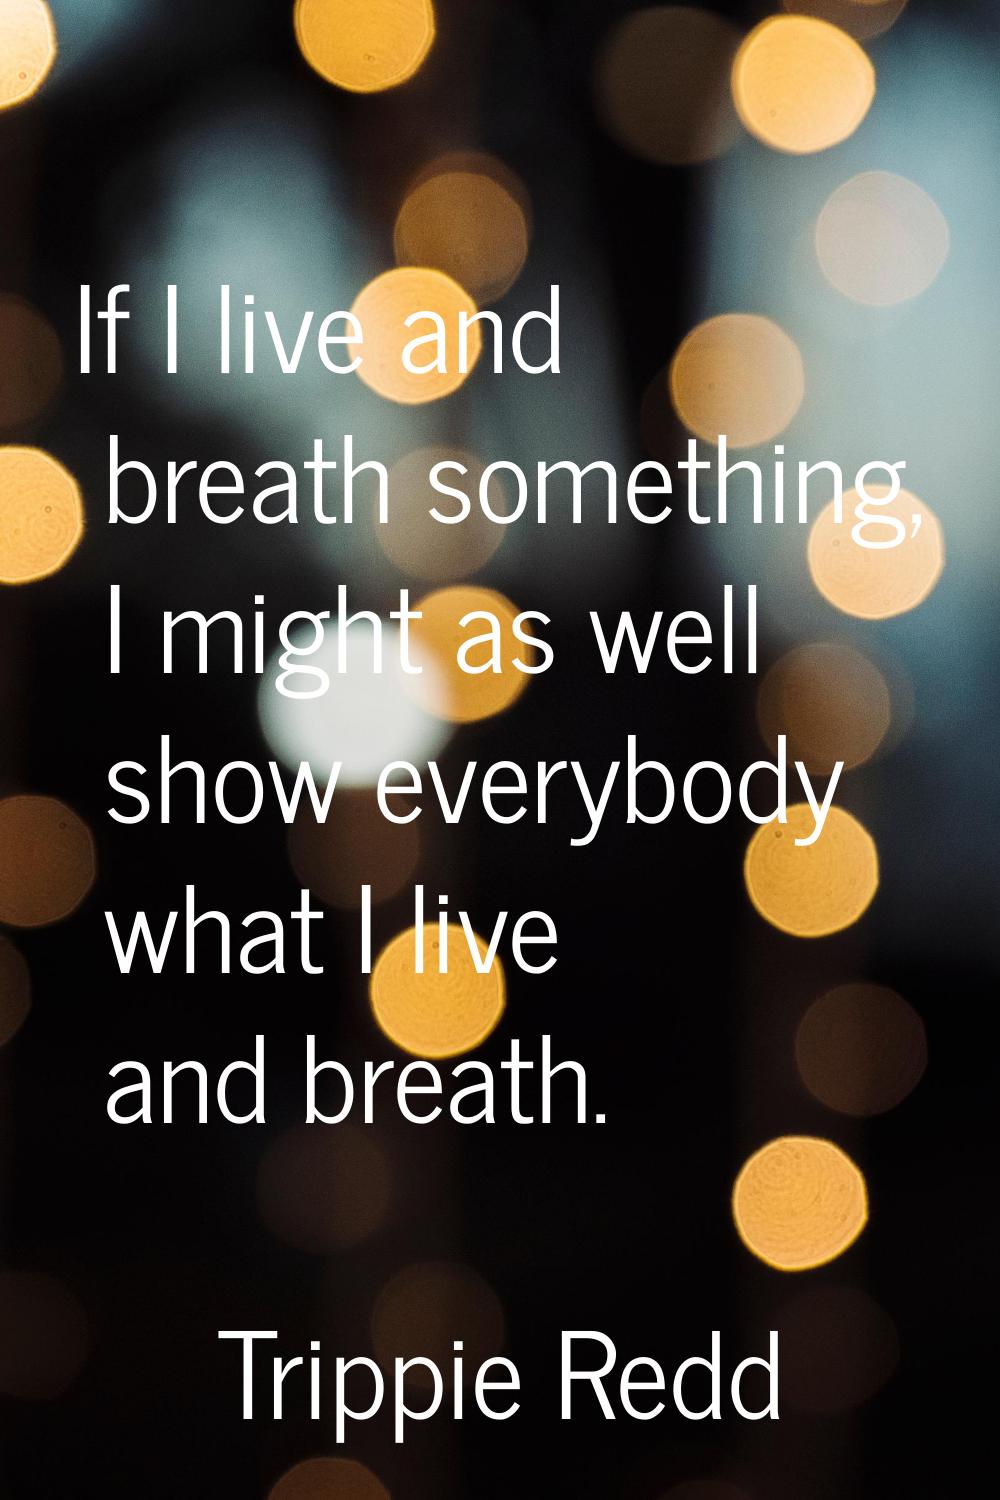 If I live and breath something, I might as well show everybody what I live and breath.